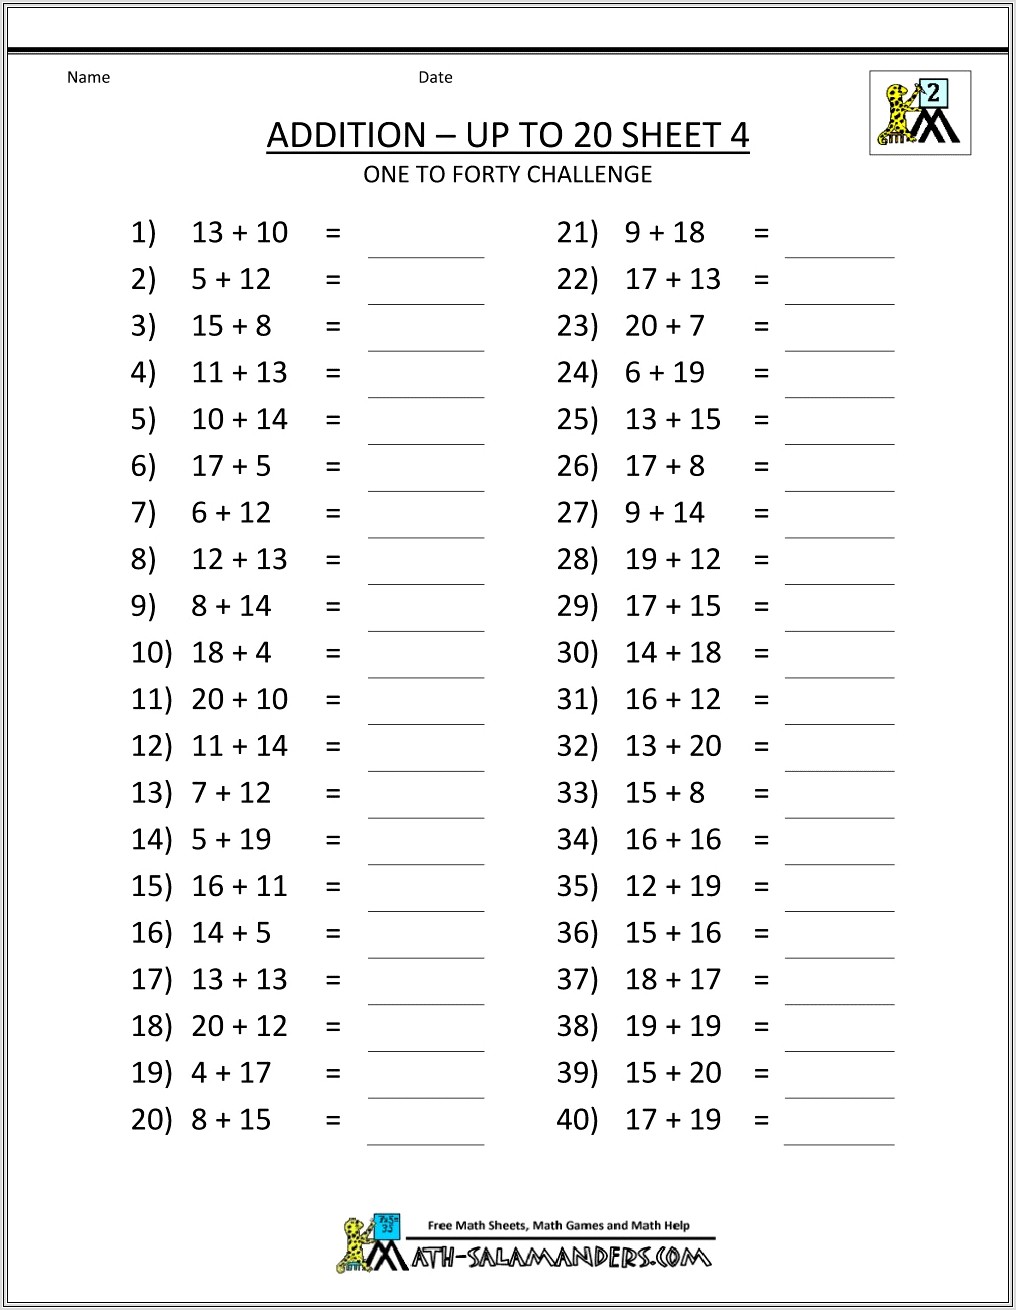 Free Math Worksheets Addition To 20